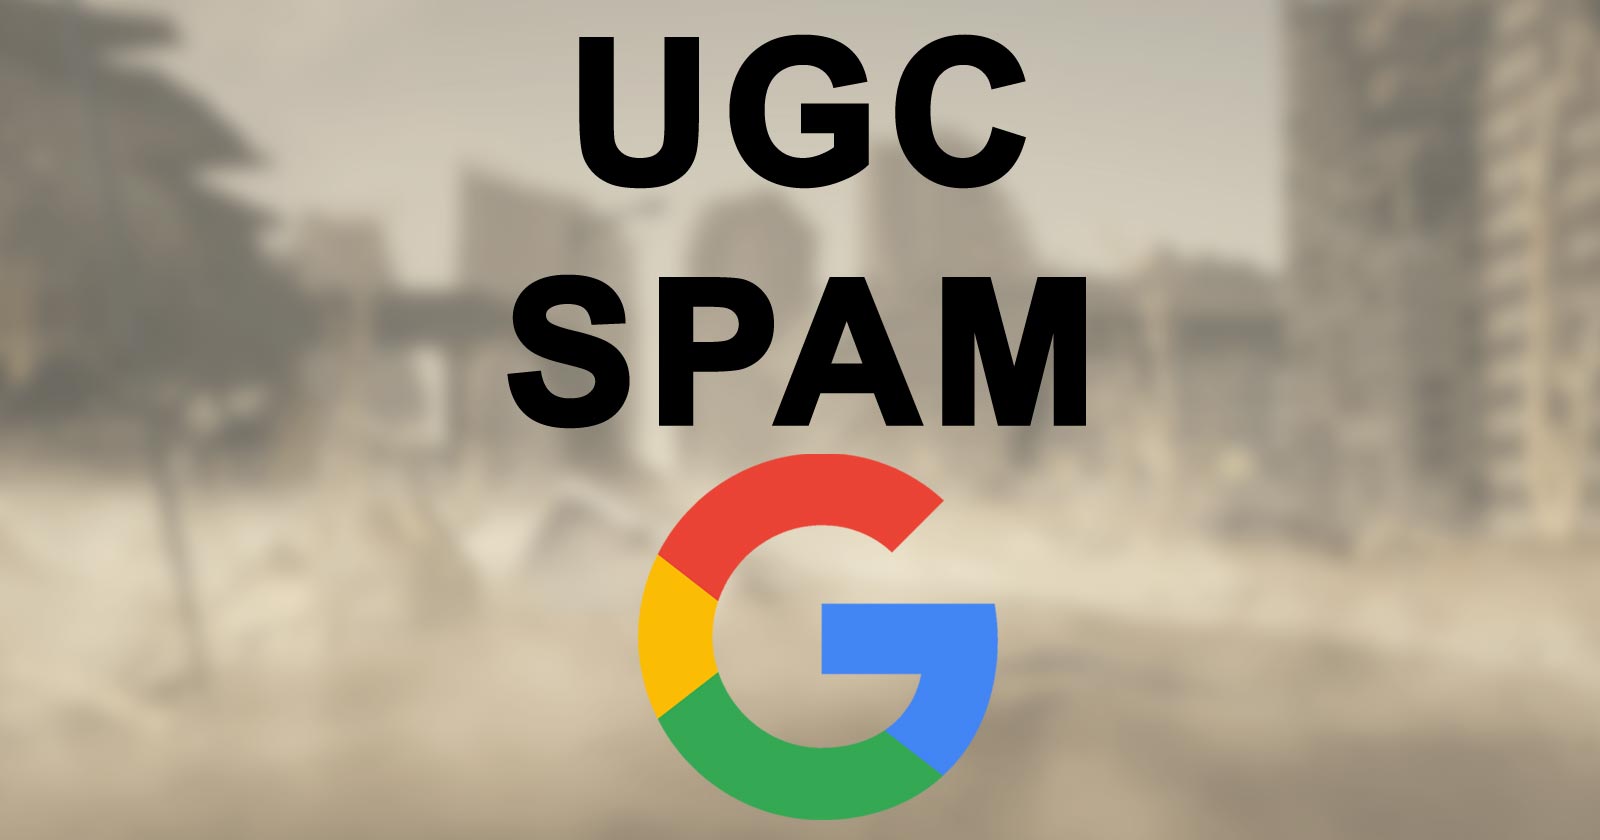 User Generated Content Spam Warning from Google